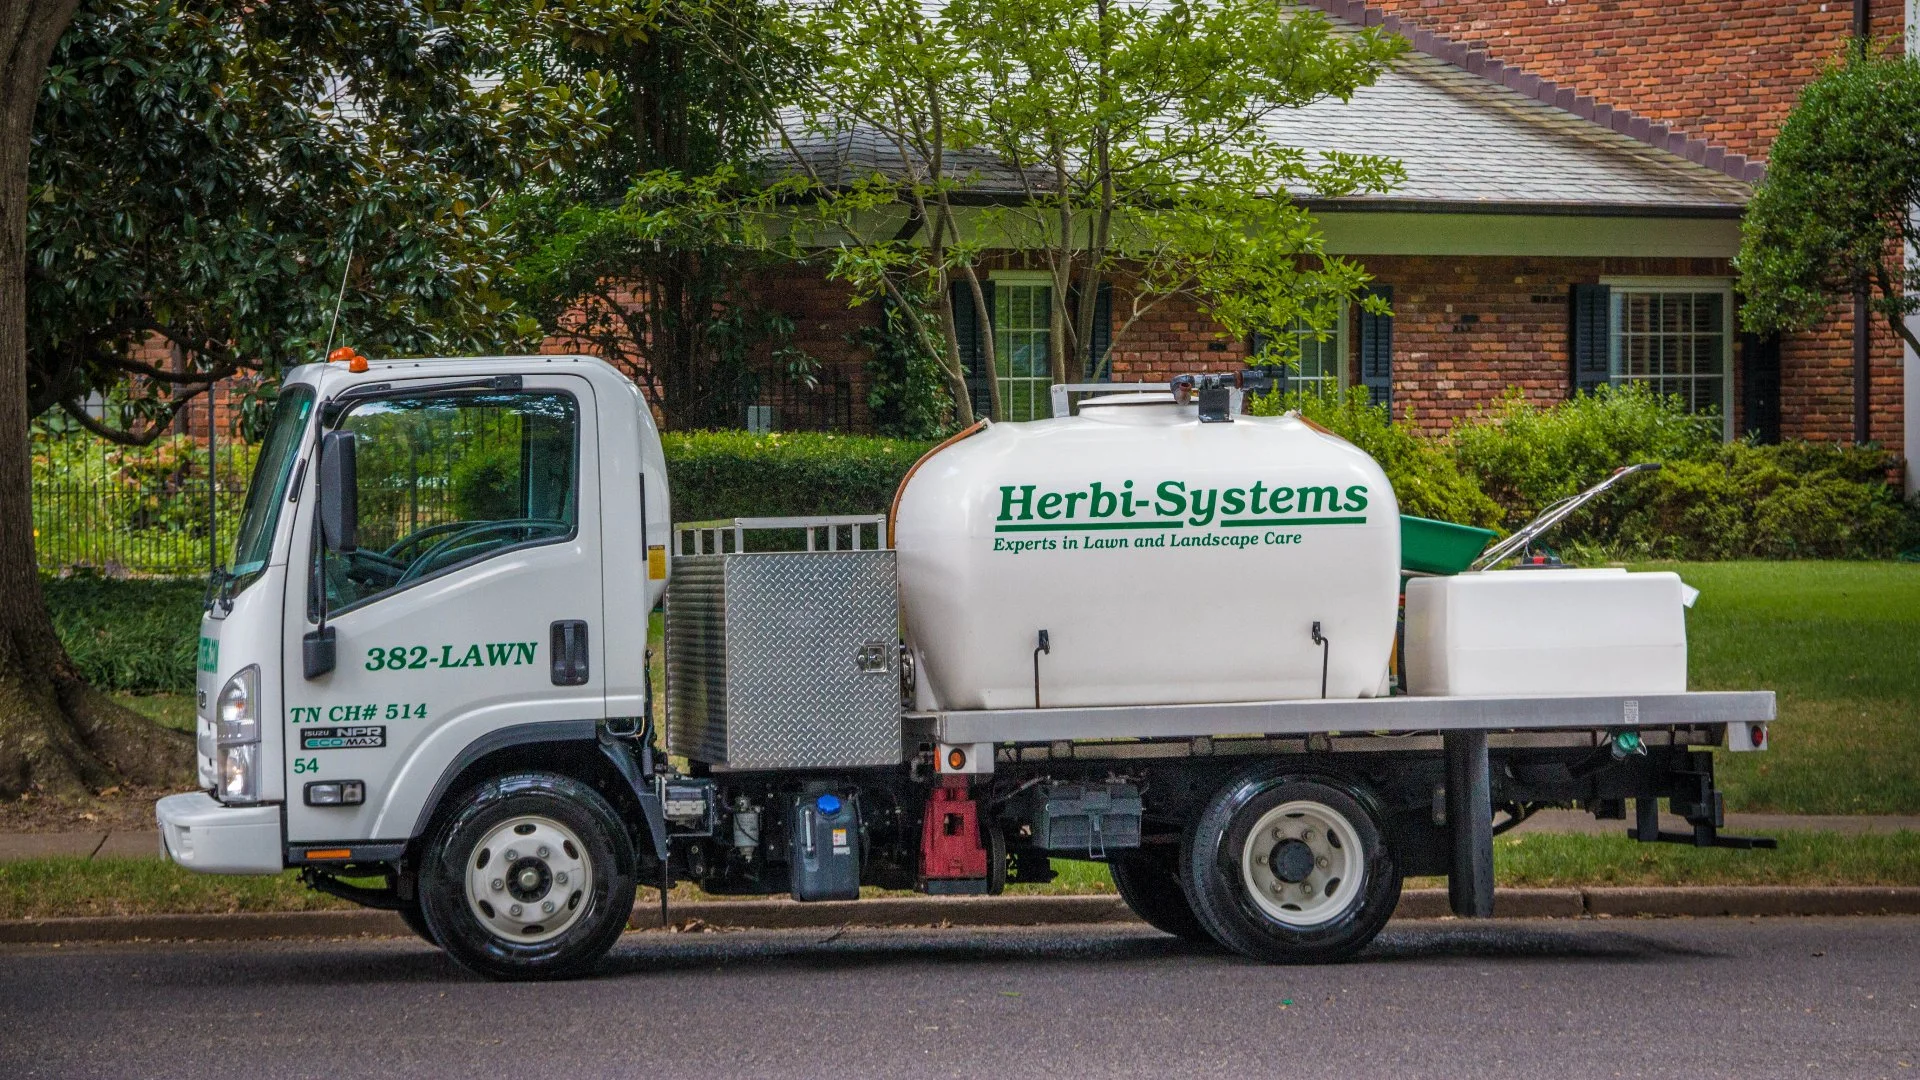 Herbi-Systems truck on the road.